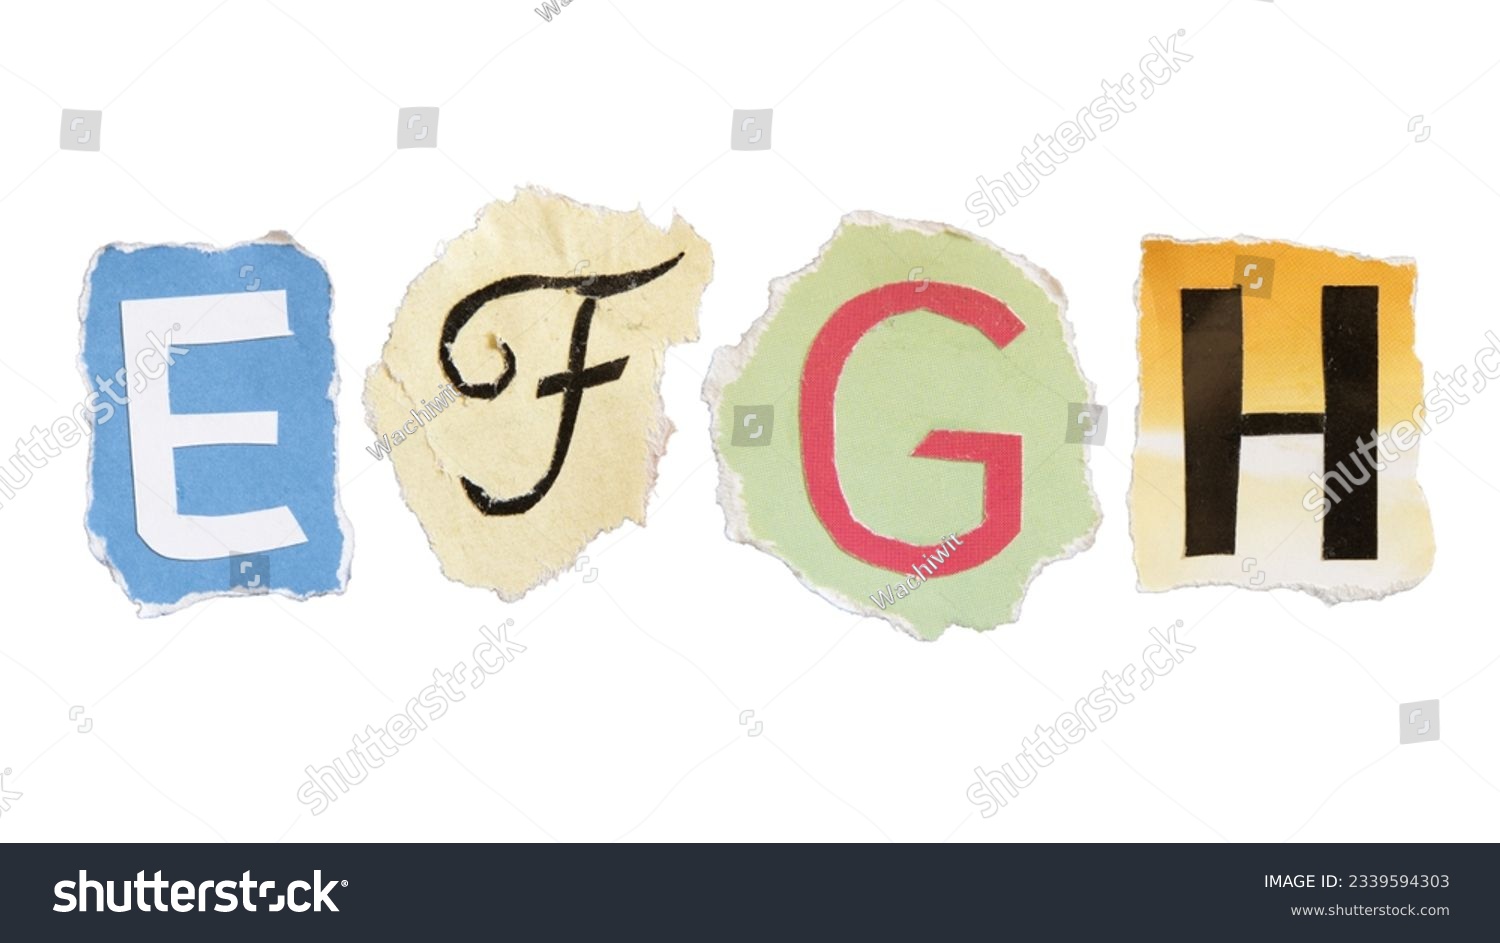 E, F, G and H alphabets on torn colorful paper with clipping path. Ransom note style letters. #2339594303